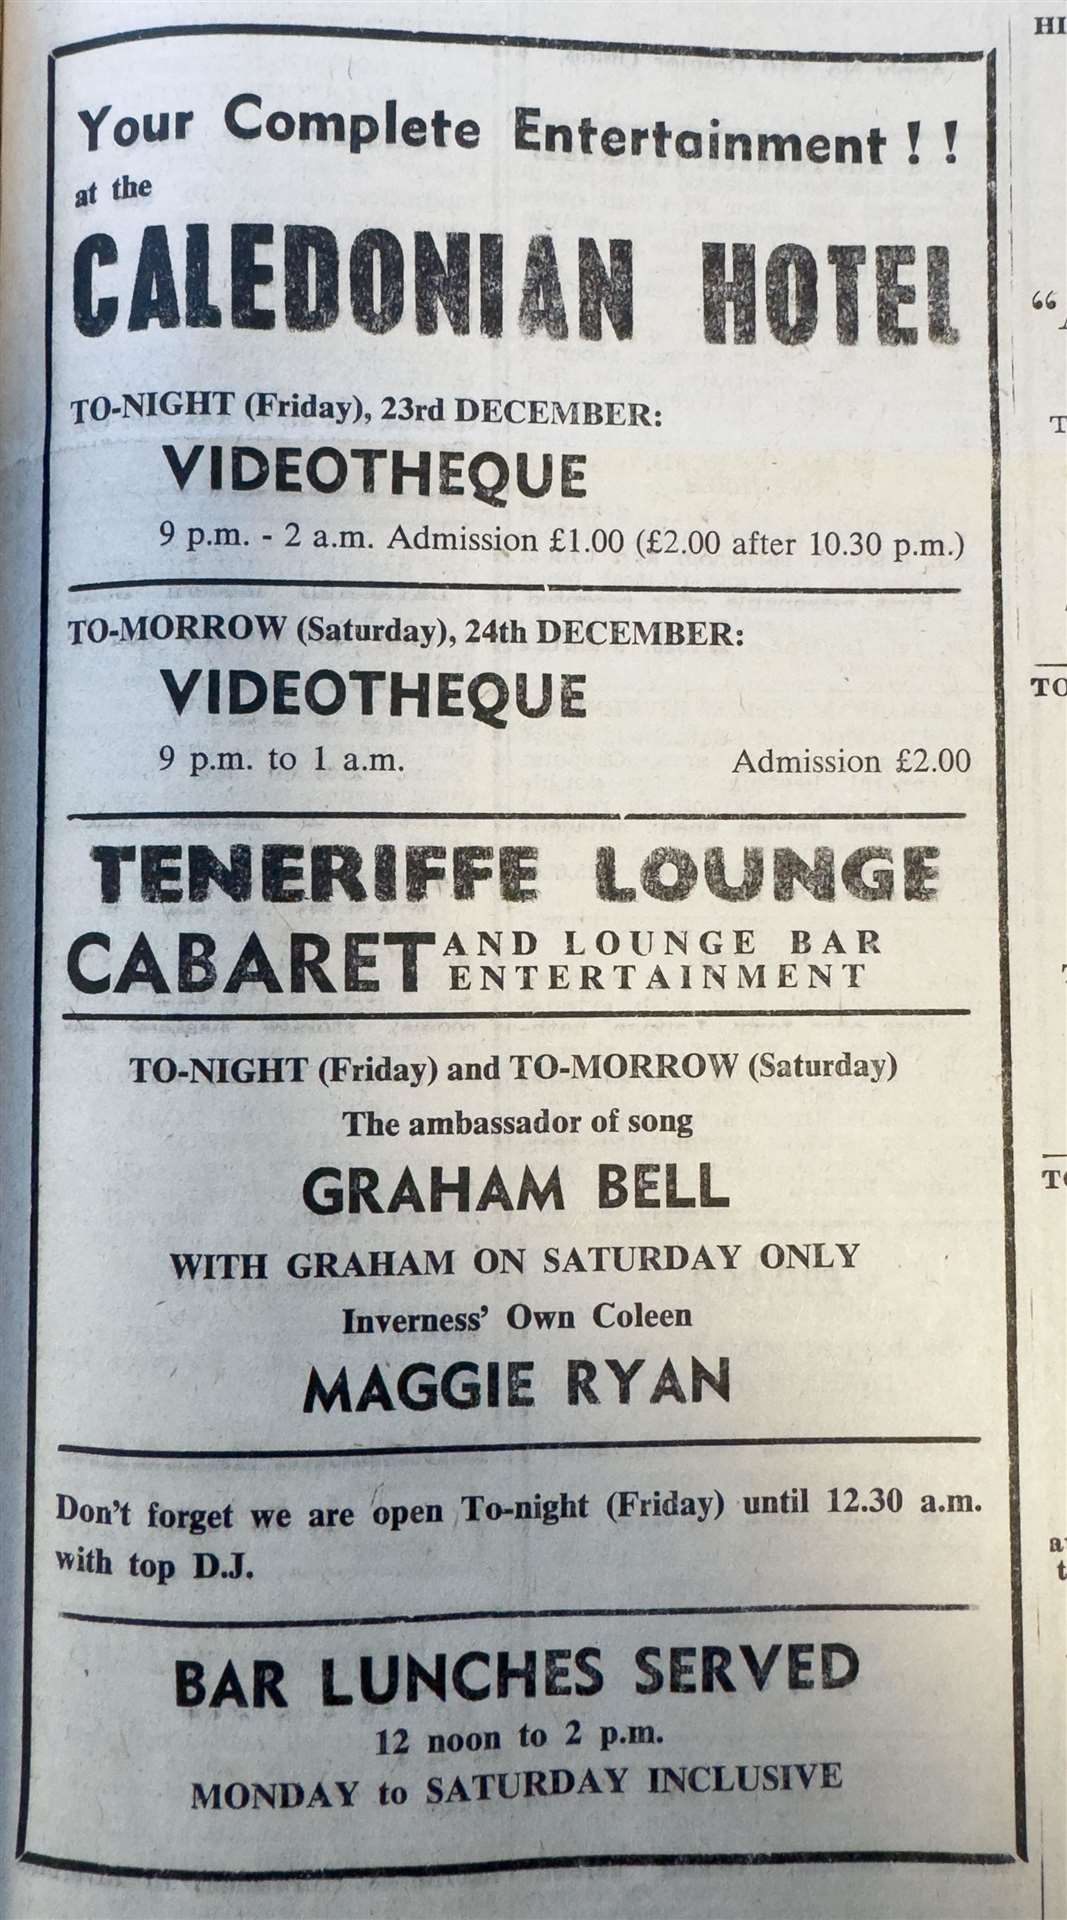 The videotheque was on the programme at the Caledonian Hotel.